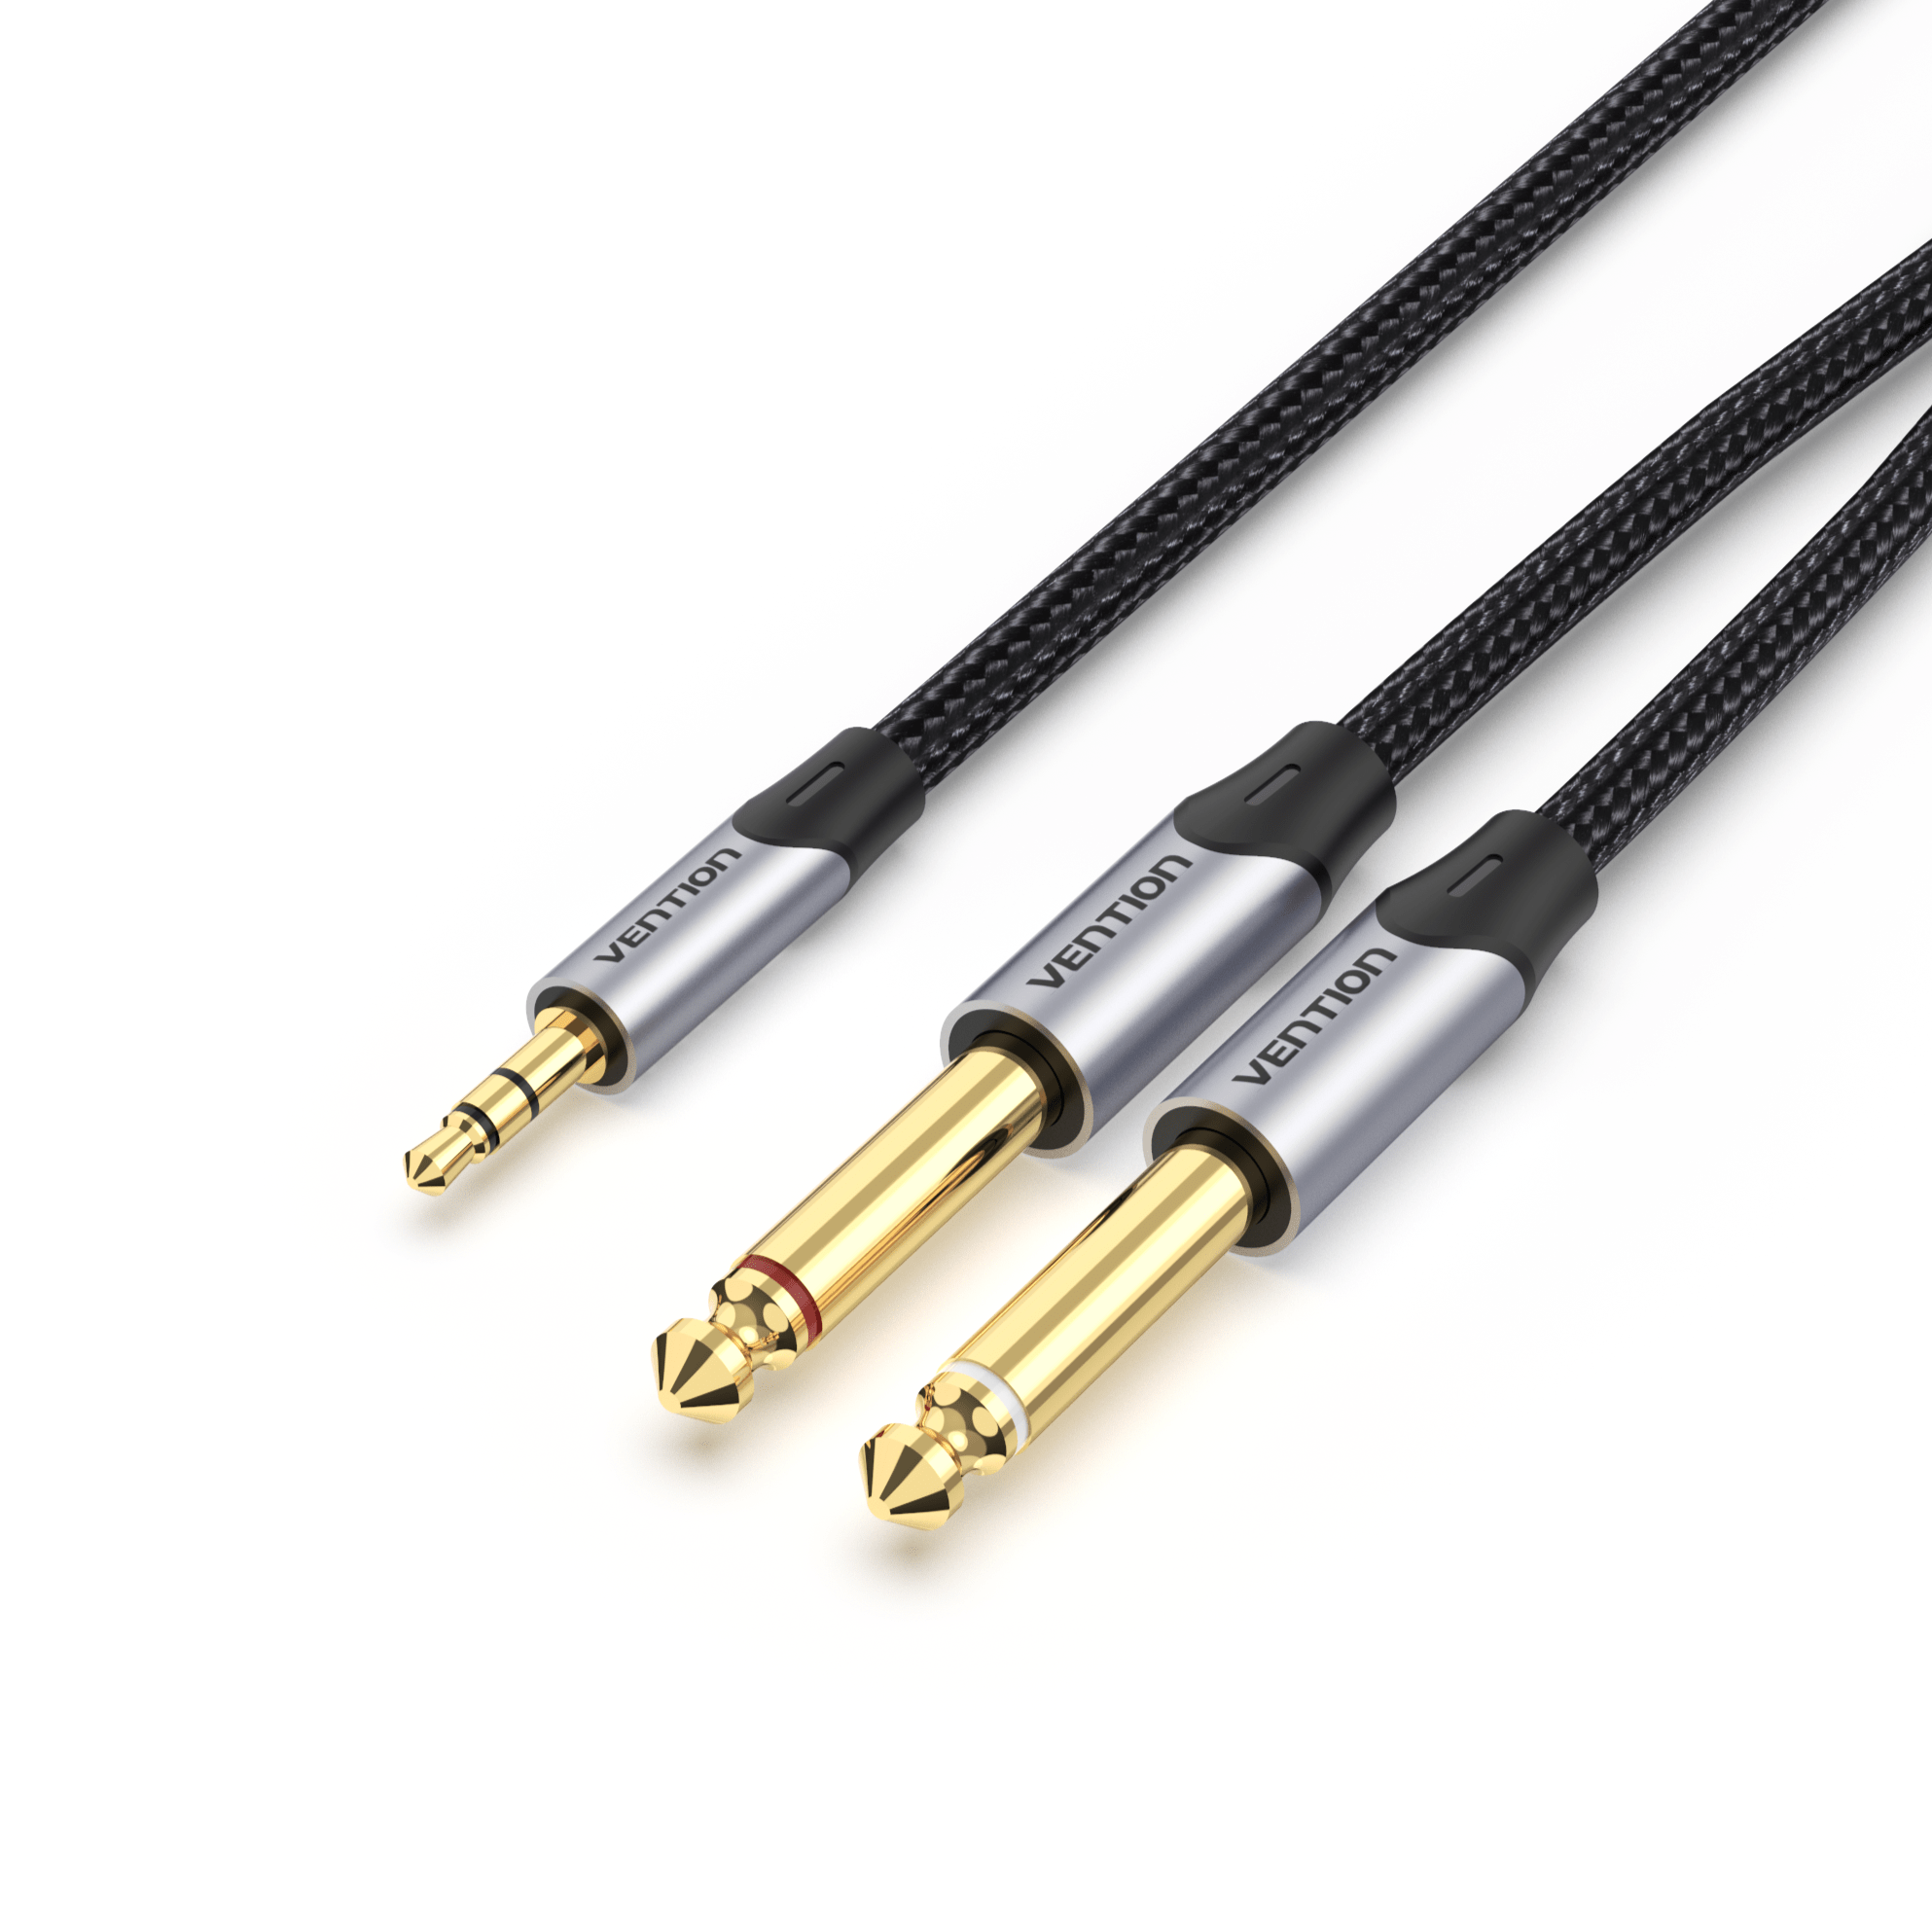 VENTION 速卖通 3.5mm to Double 6.5mm TRS Cable AUX Male Mono 6.5 Jack to Stereo 3.5 Jack Audio Cable for Mixer Amplifier 6.35 Adapter